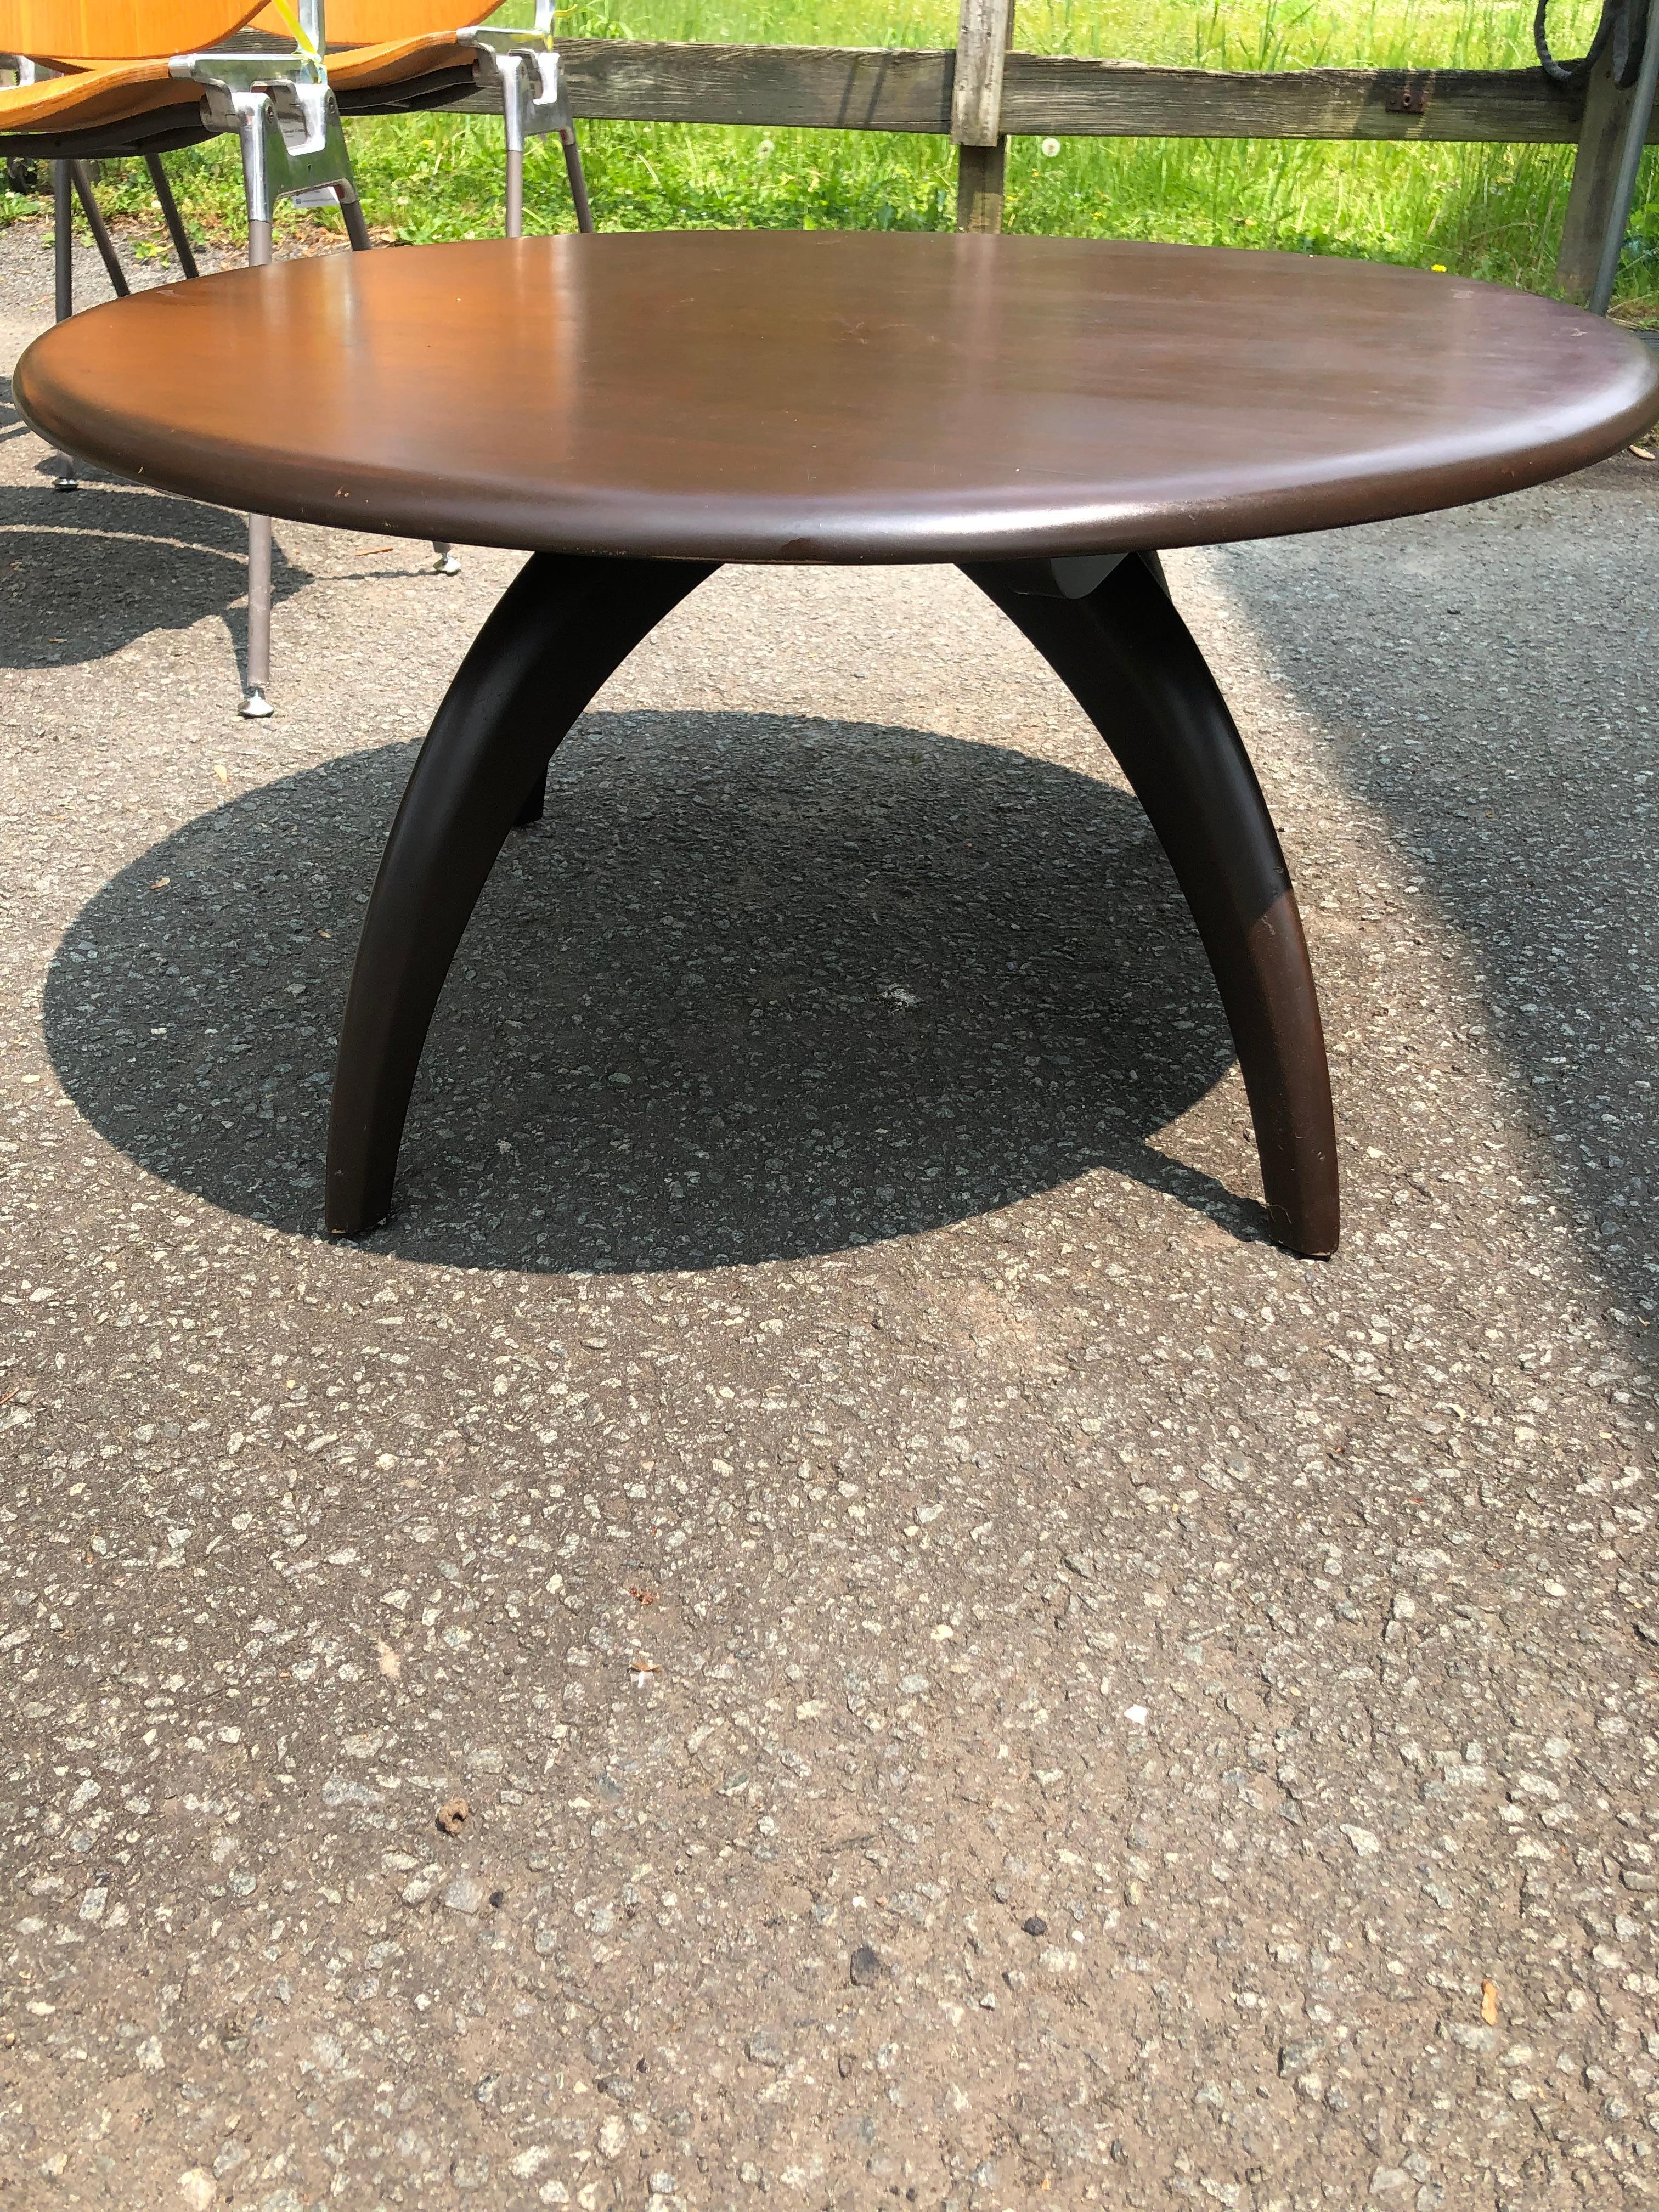 A handsome round dark oak small coffee table by Heywood Wakefield having 4 splayed legs and a top that swivels.